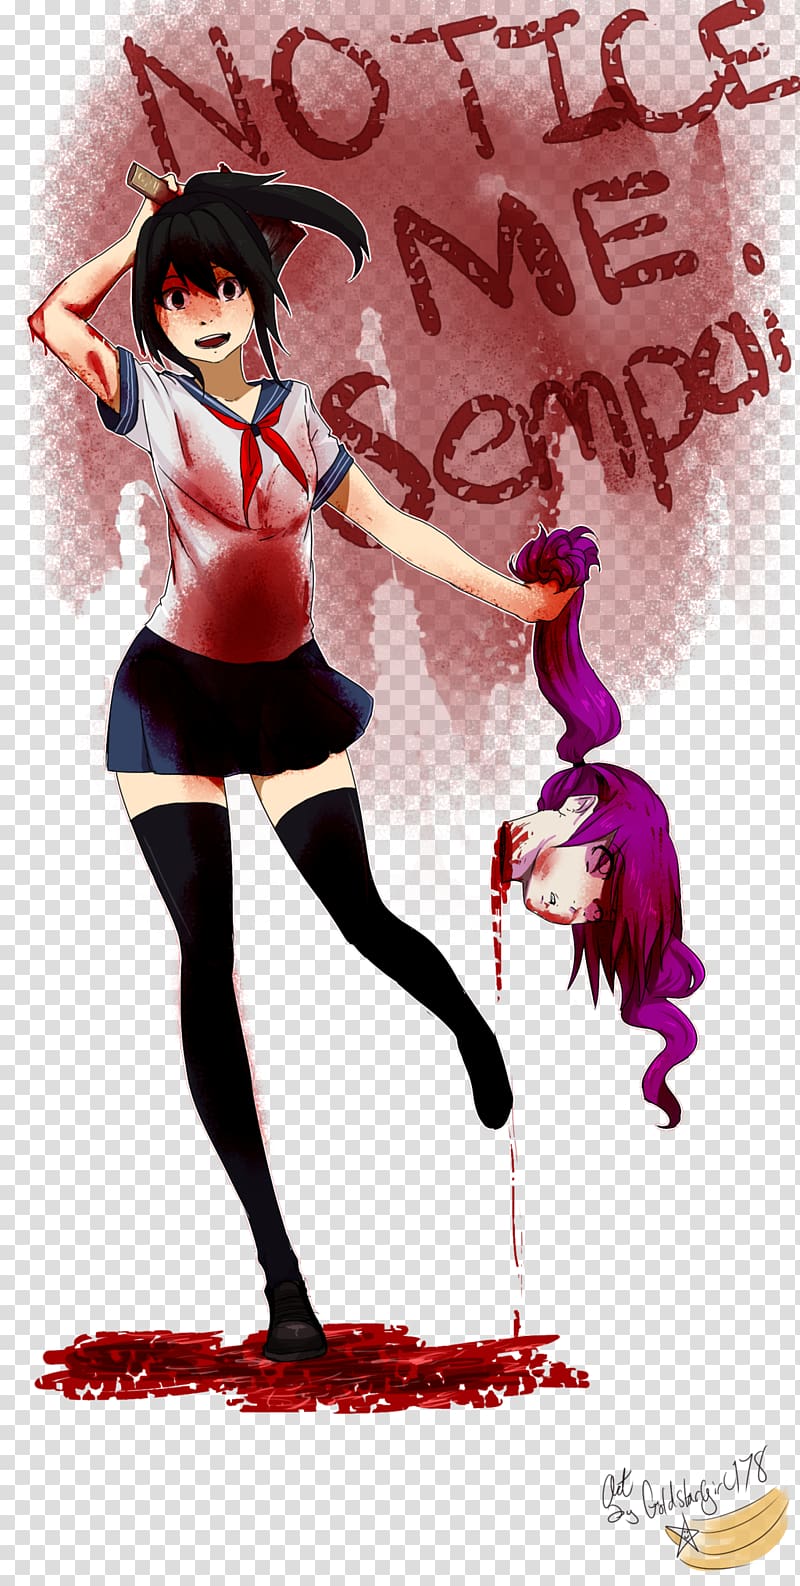 Yandere Simulator Game Drawing Character Toga Anime Transparent Background Png Clipart Hiclipart - they stole my thumbnail for a yandere simulator roblox game